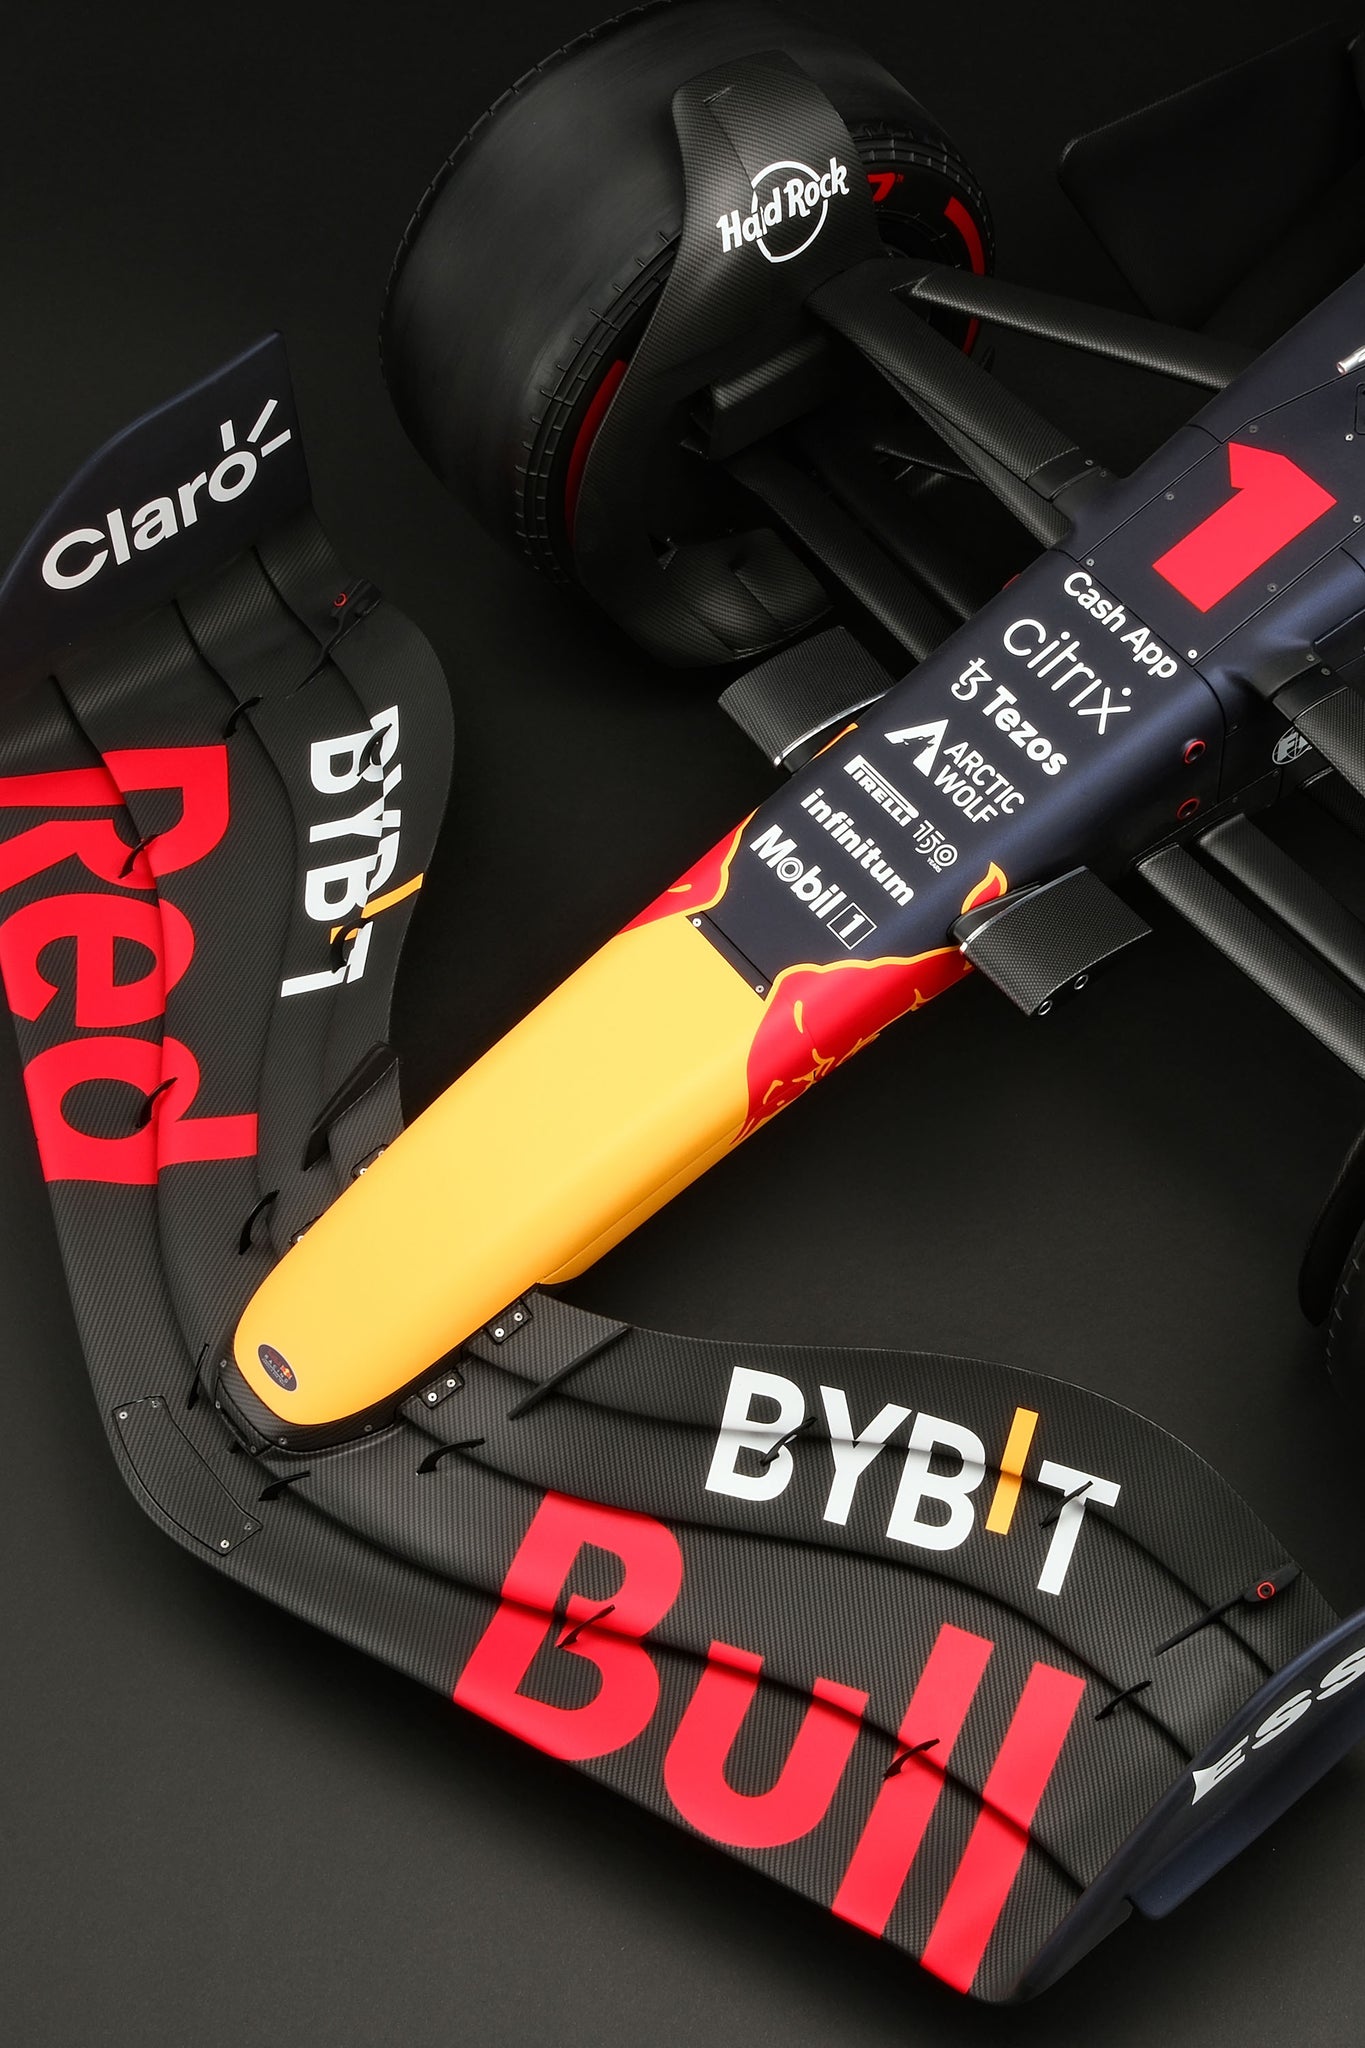 Oracle Red Bull 1:4 スケールのレーシング RB18